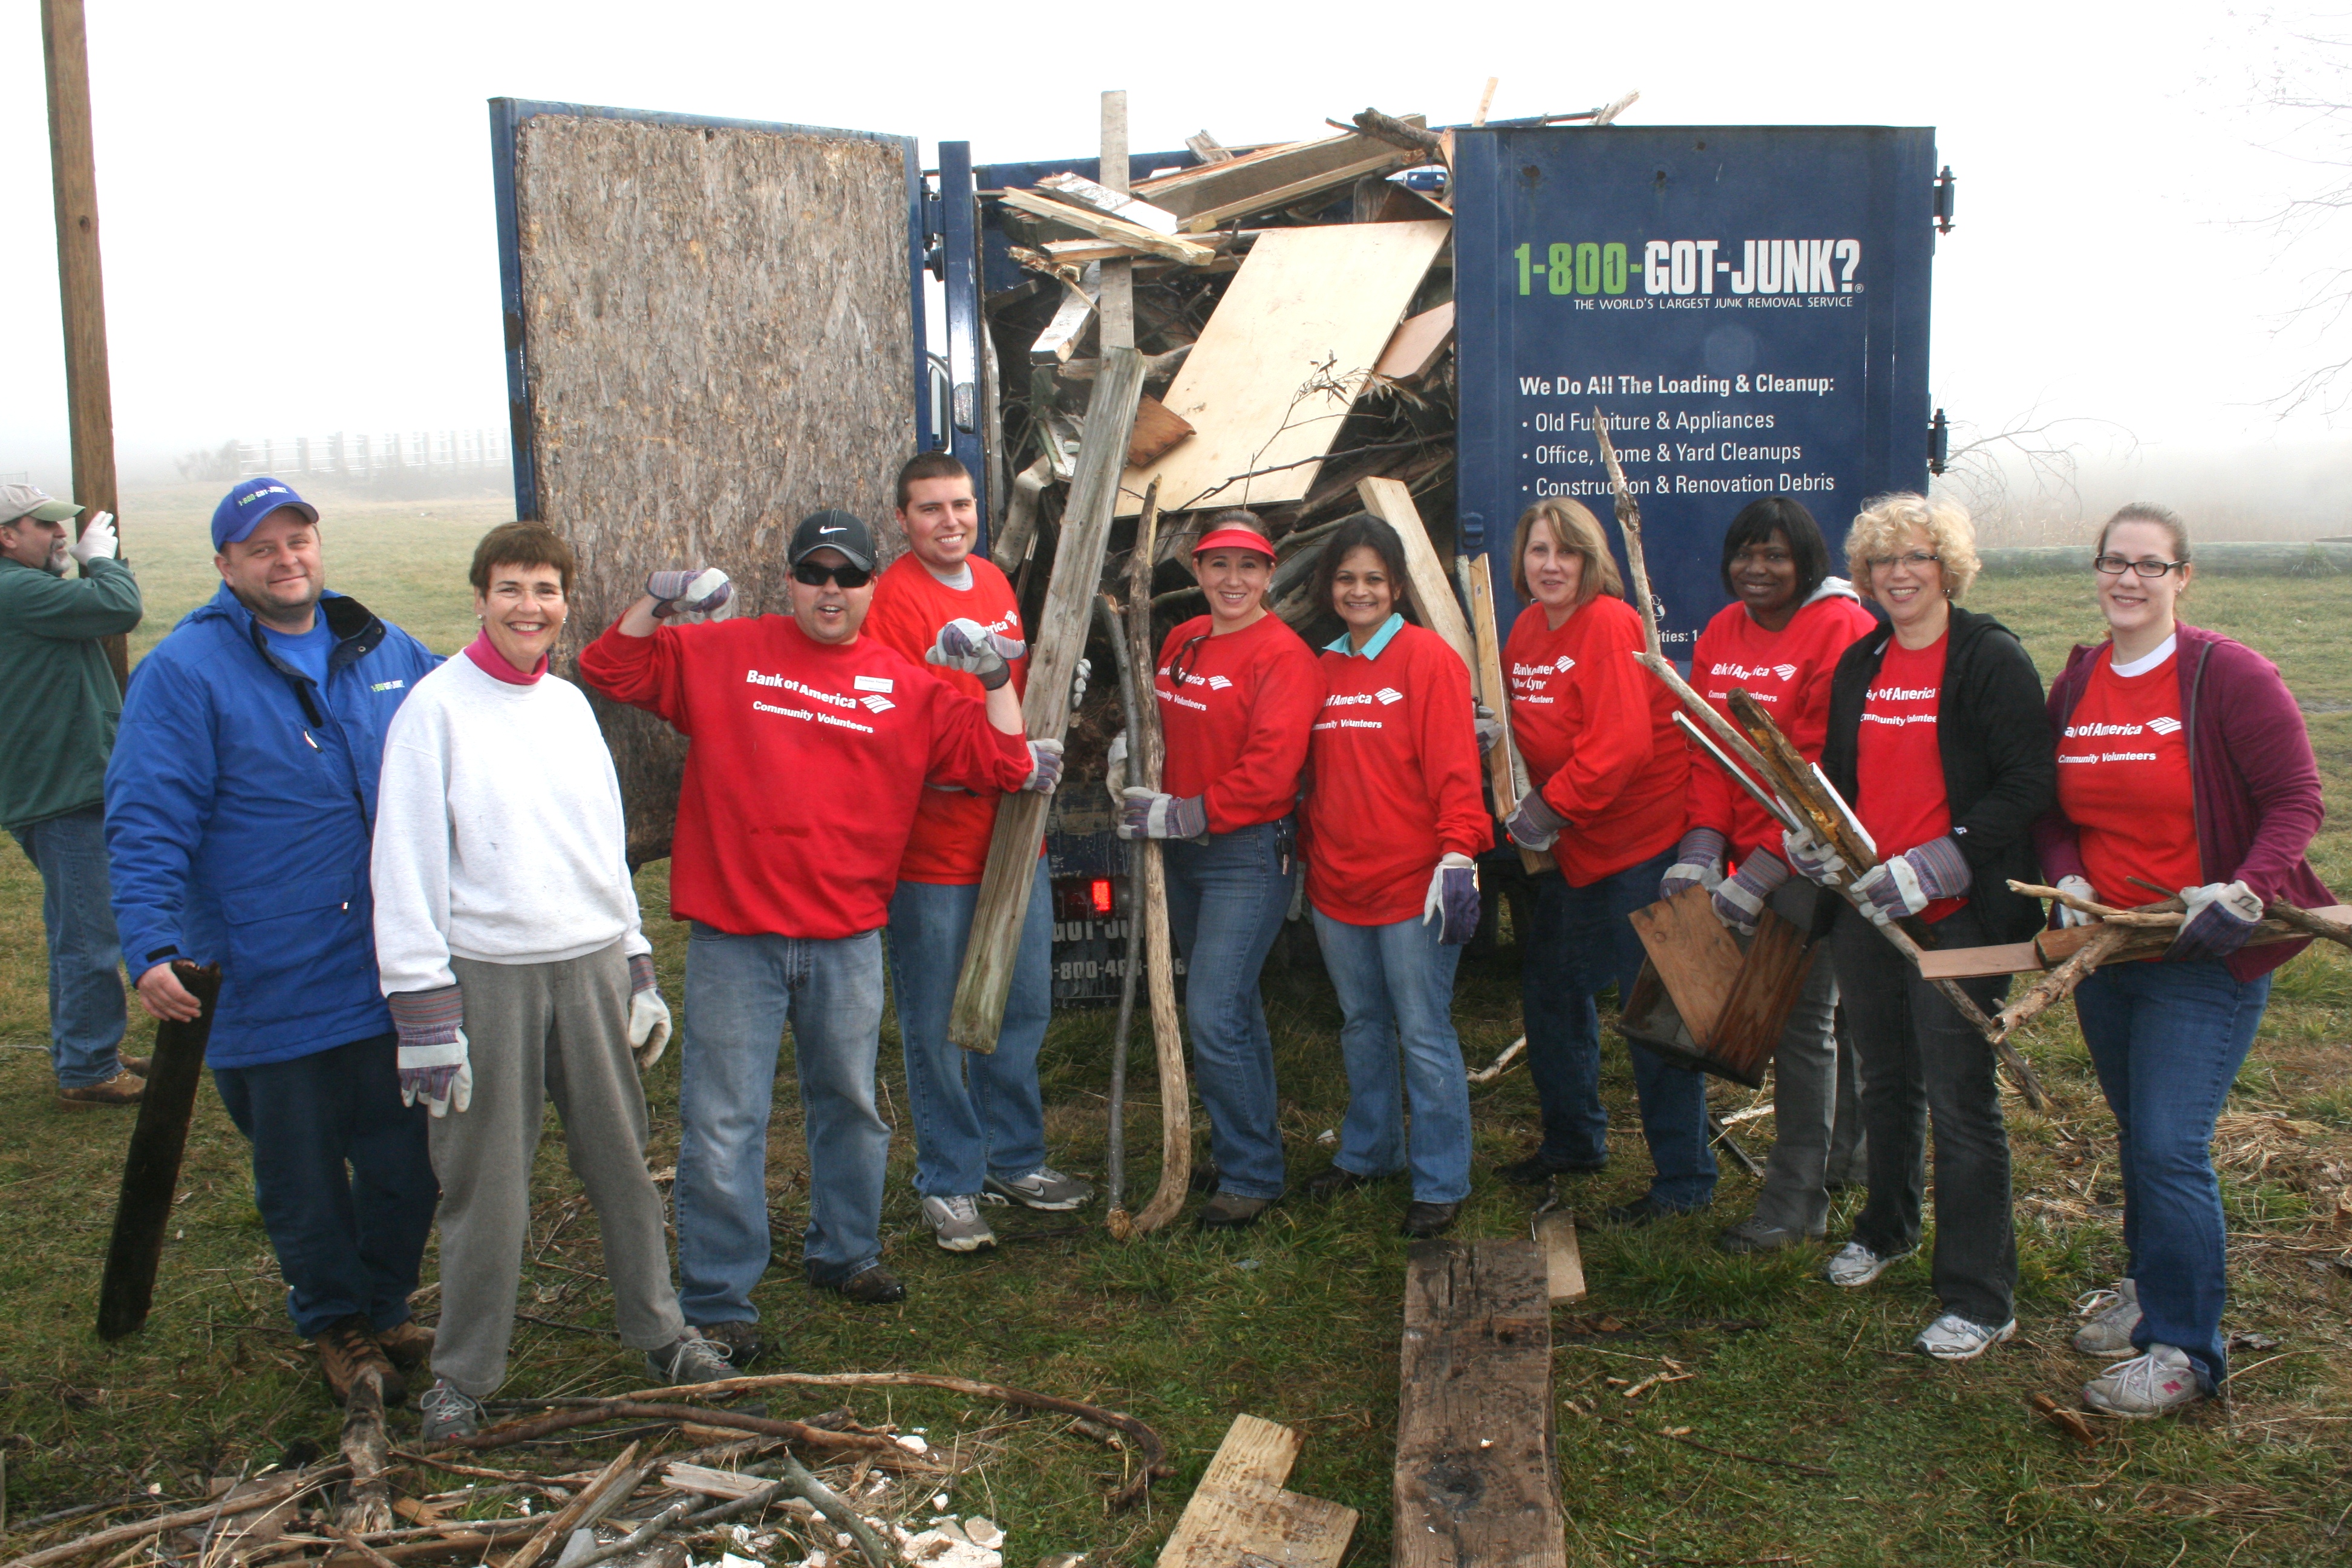 The full group of Bank of America volunteers at the end of the cleanup